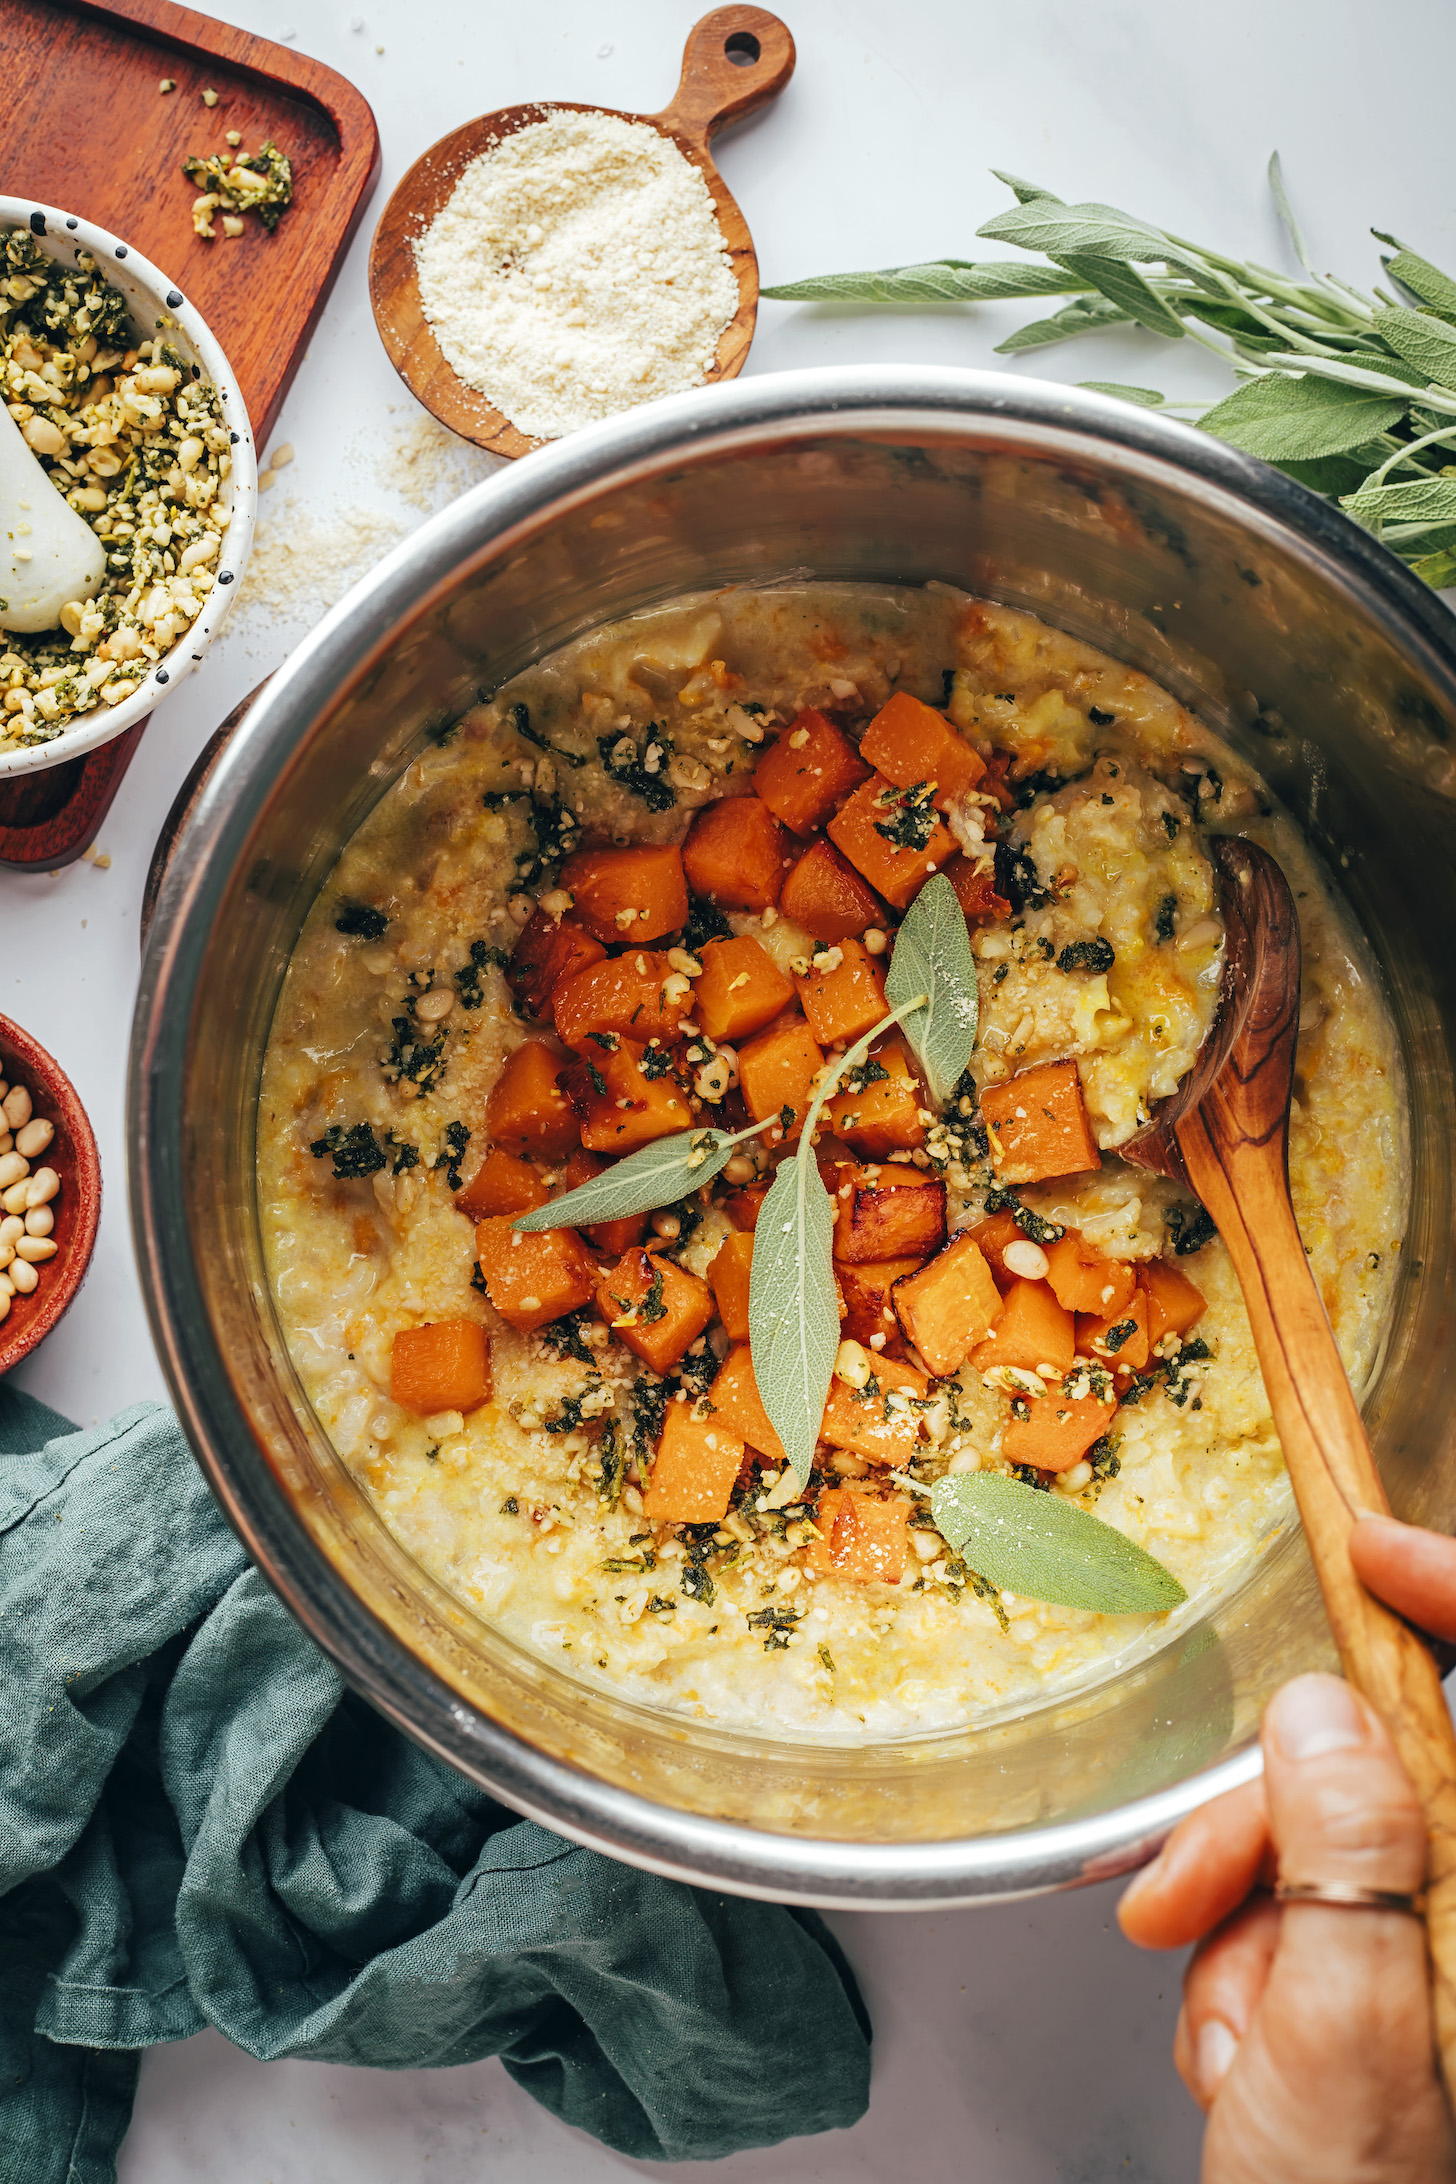 Cubed butternut squash and pine nut sage topping in an Instant Pot over risotto